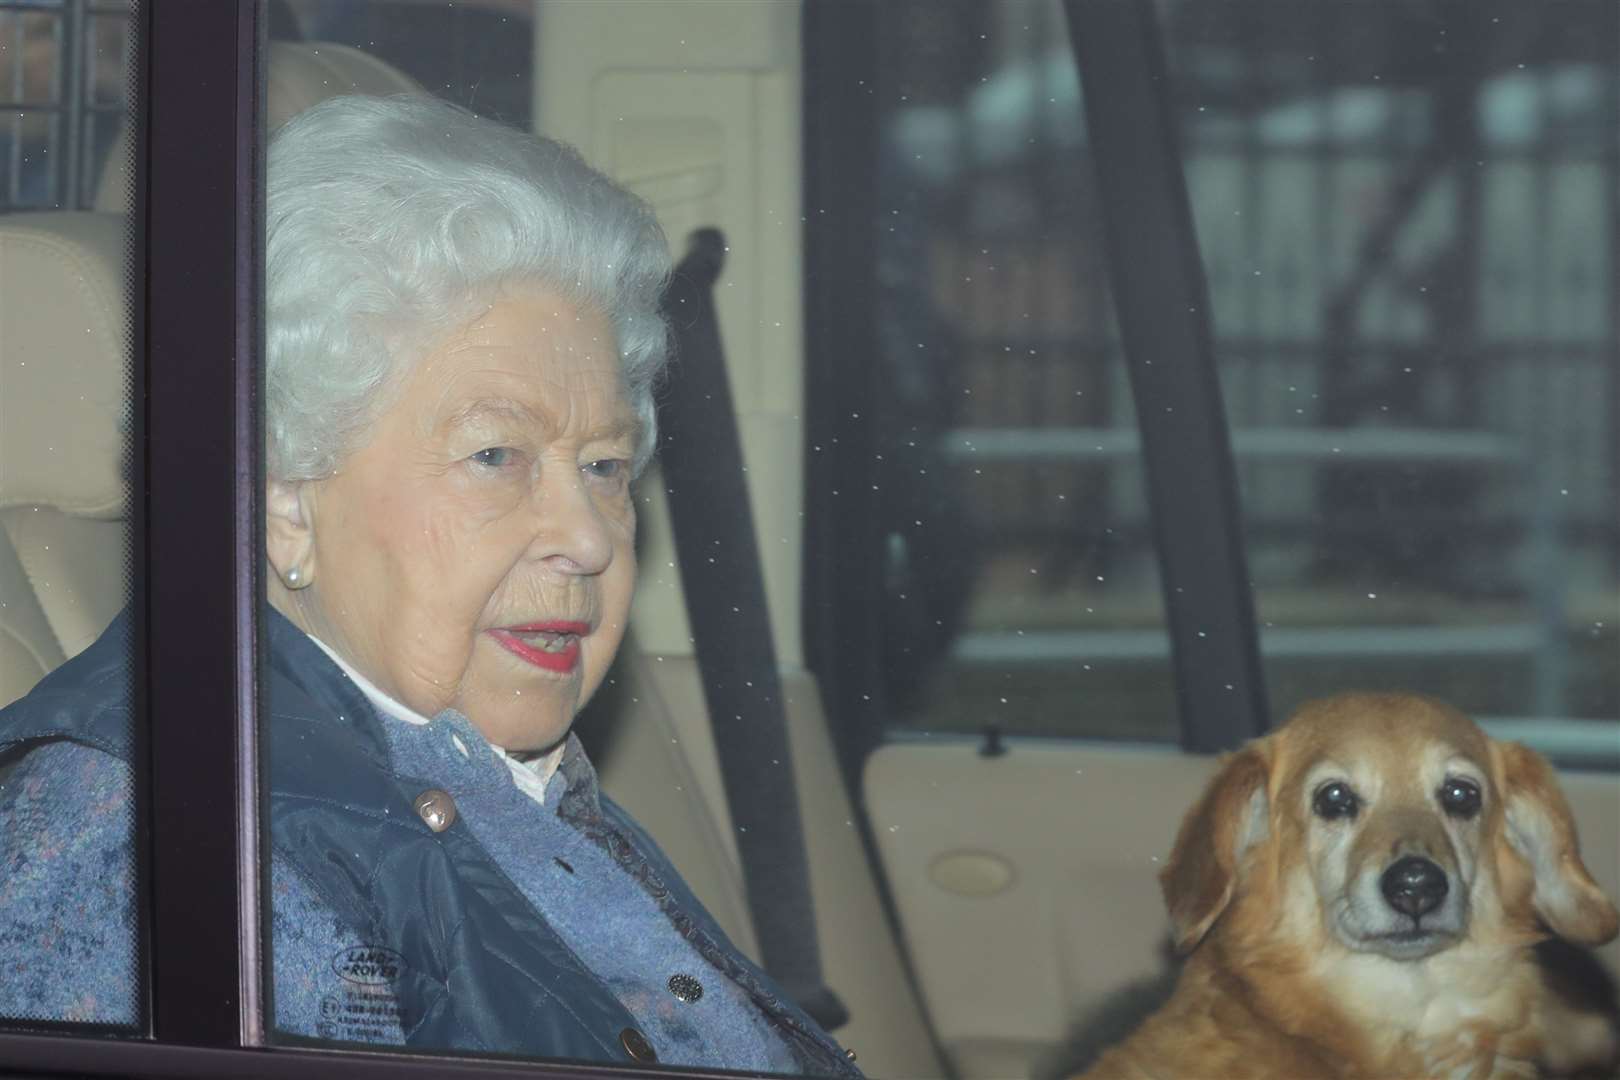 The Queen leaves Buckingham Palace in March 2020 to socially distance herself at Windsor Castle amid the coronavirus pandemic (Aaron Chown/PA)